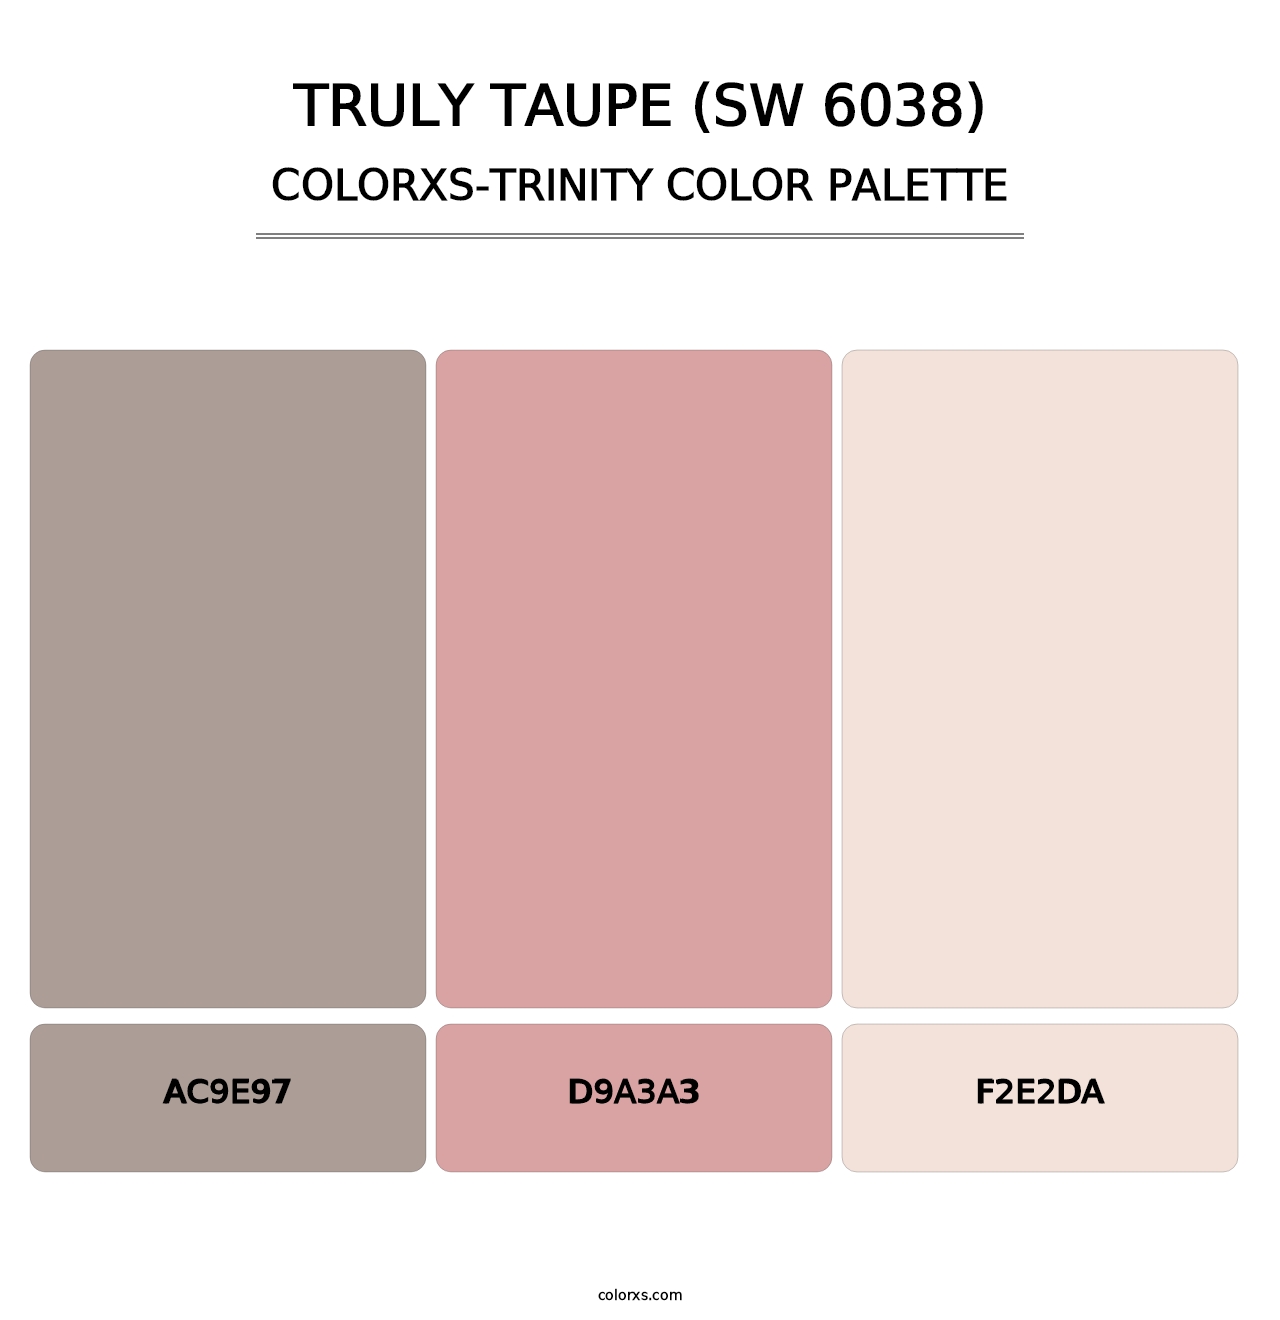 Truly Taupe (SW 6038) - Colorxs Trinity Palette